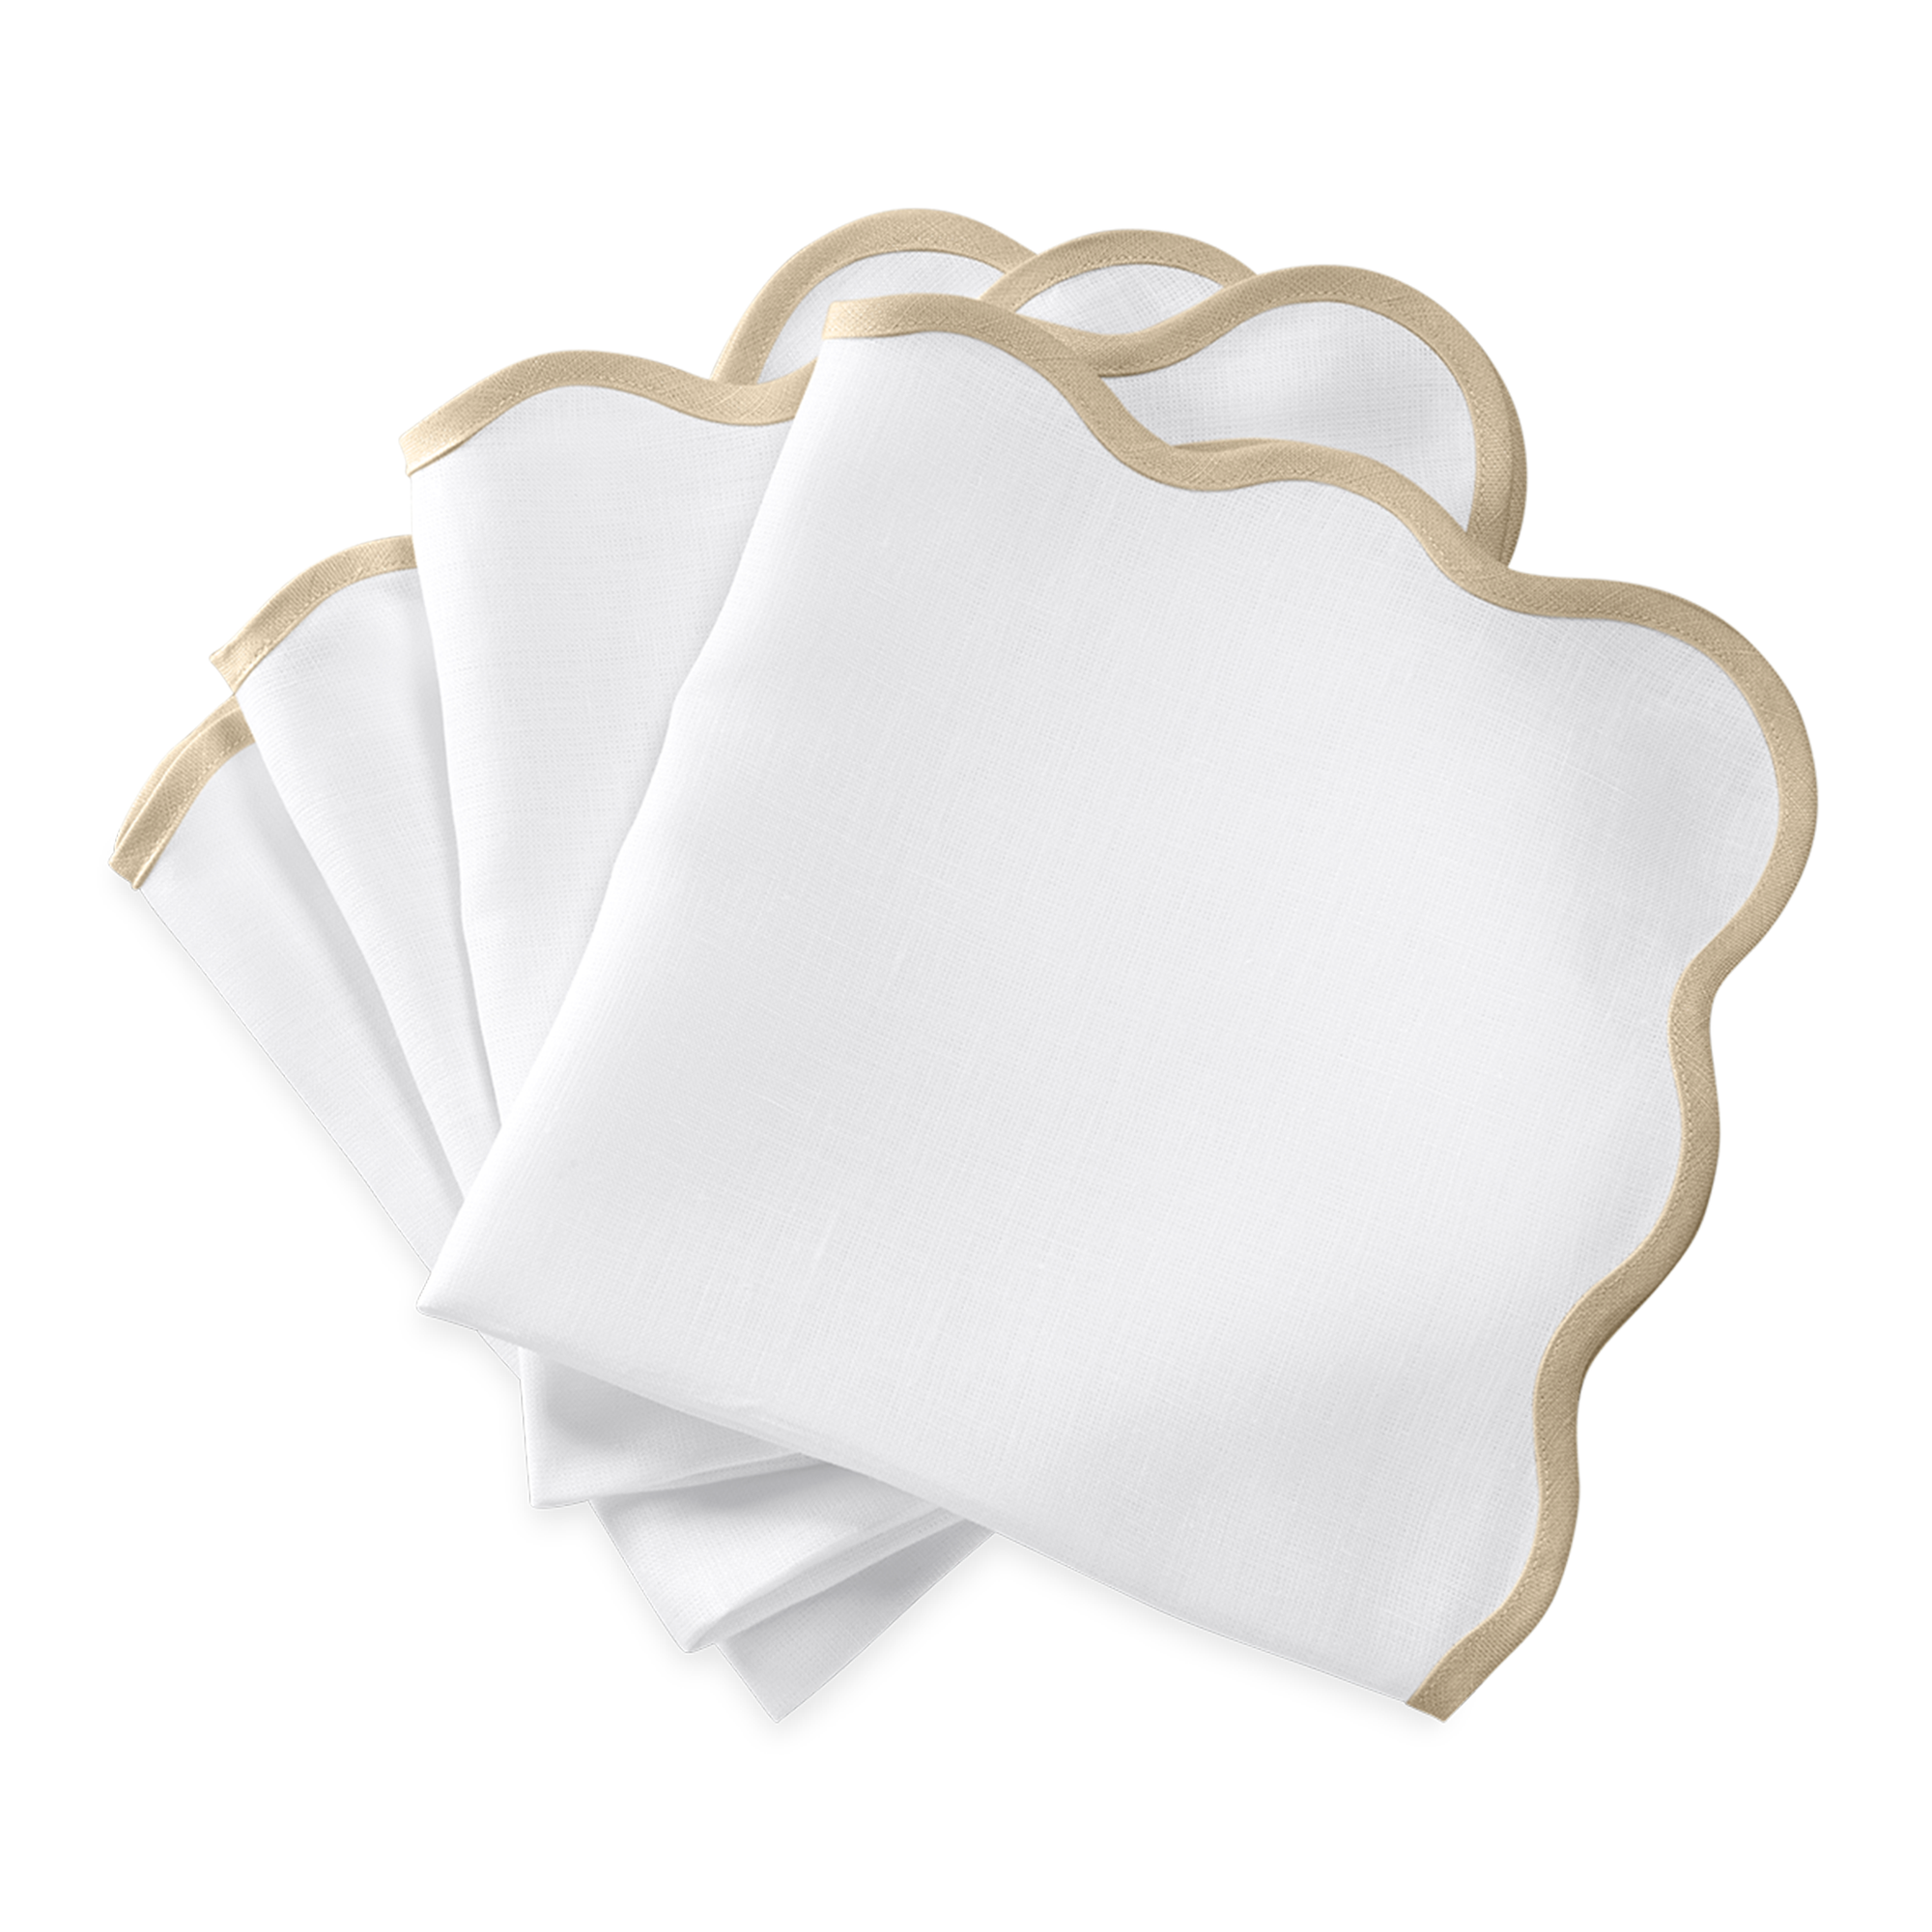 Dinner Napkins of Matouk Scallop Edge Table Linens in Color Oat